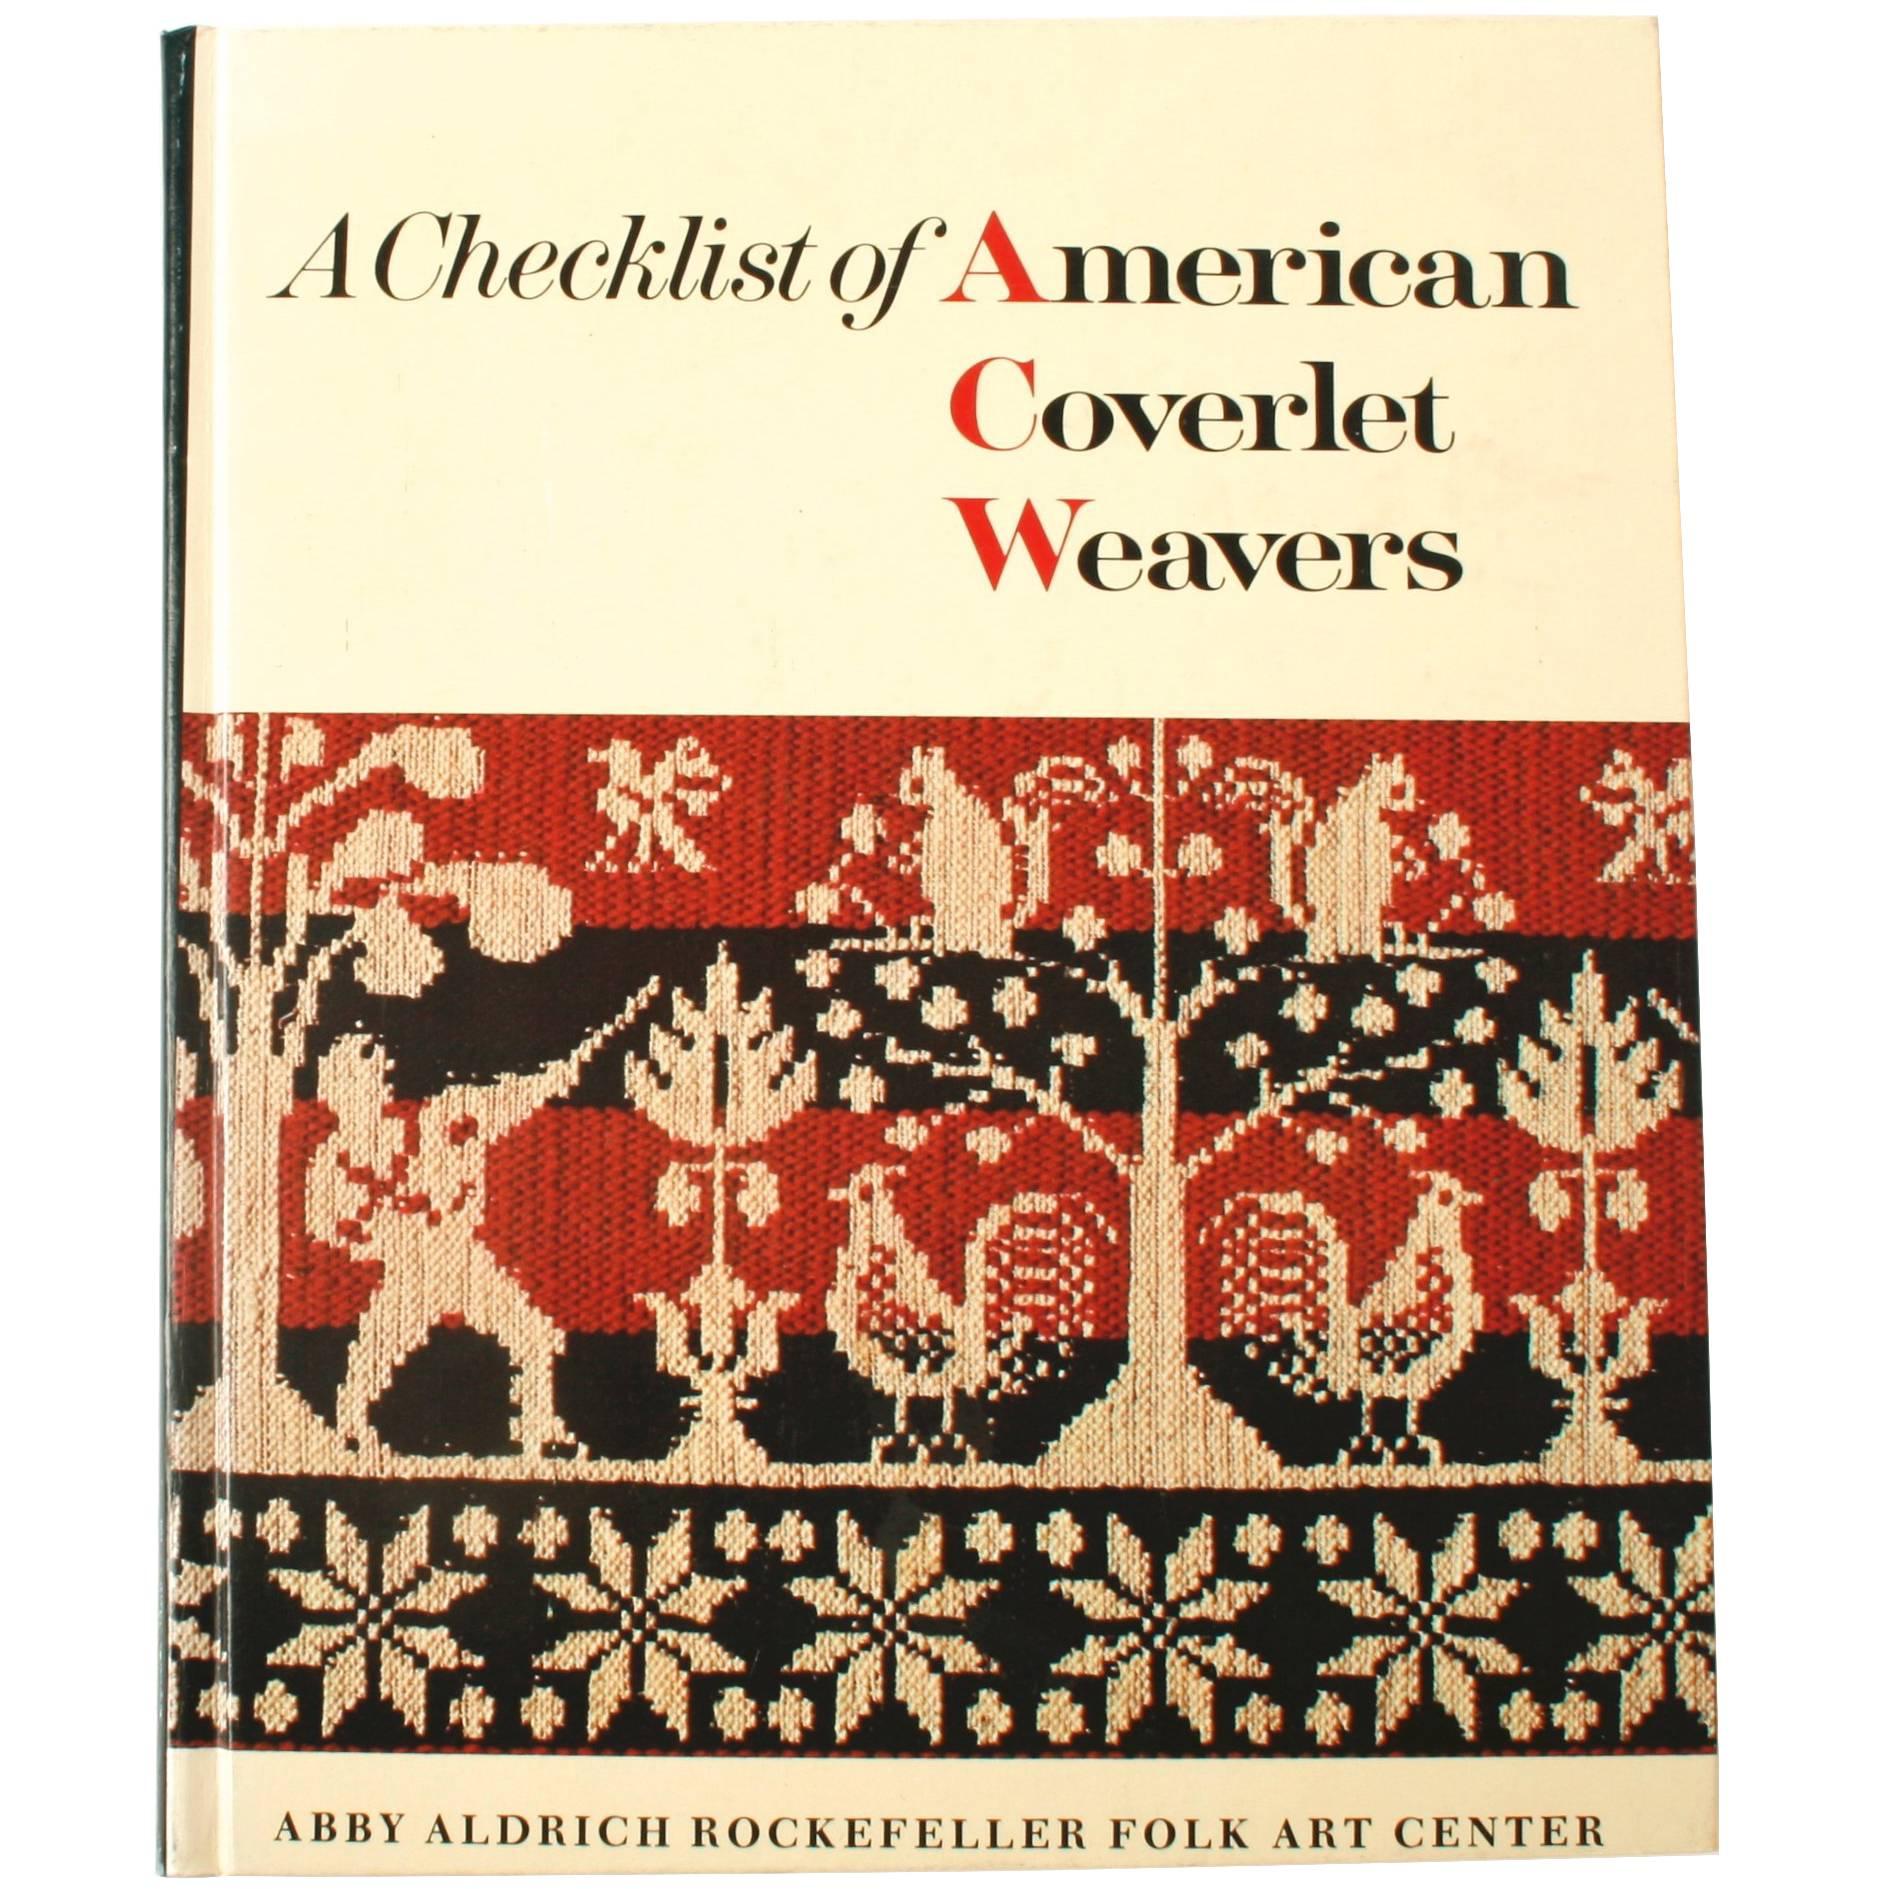 "A Checklist of American Coverlet Weavers" Book by John Heisey For Sale